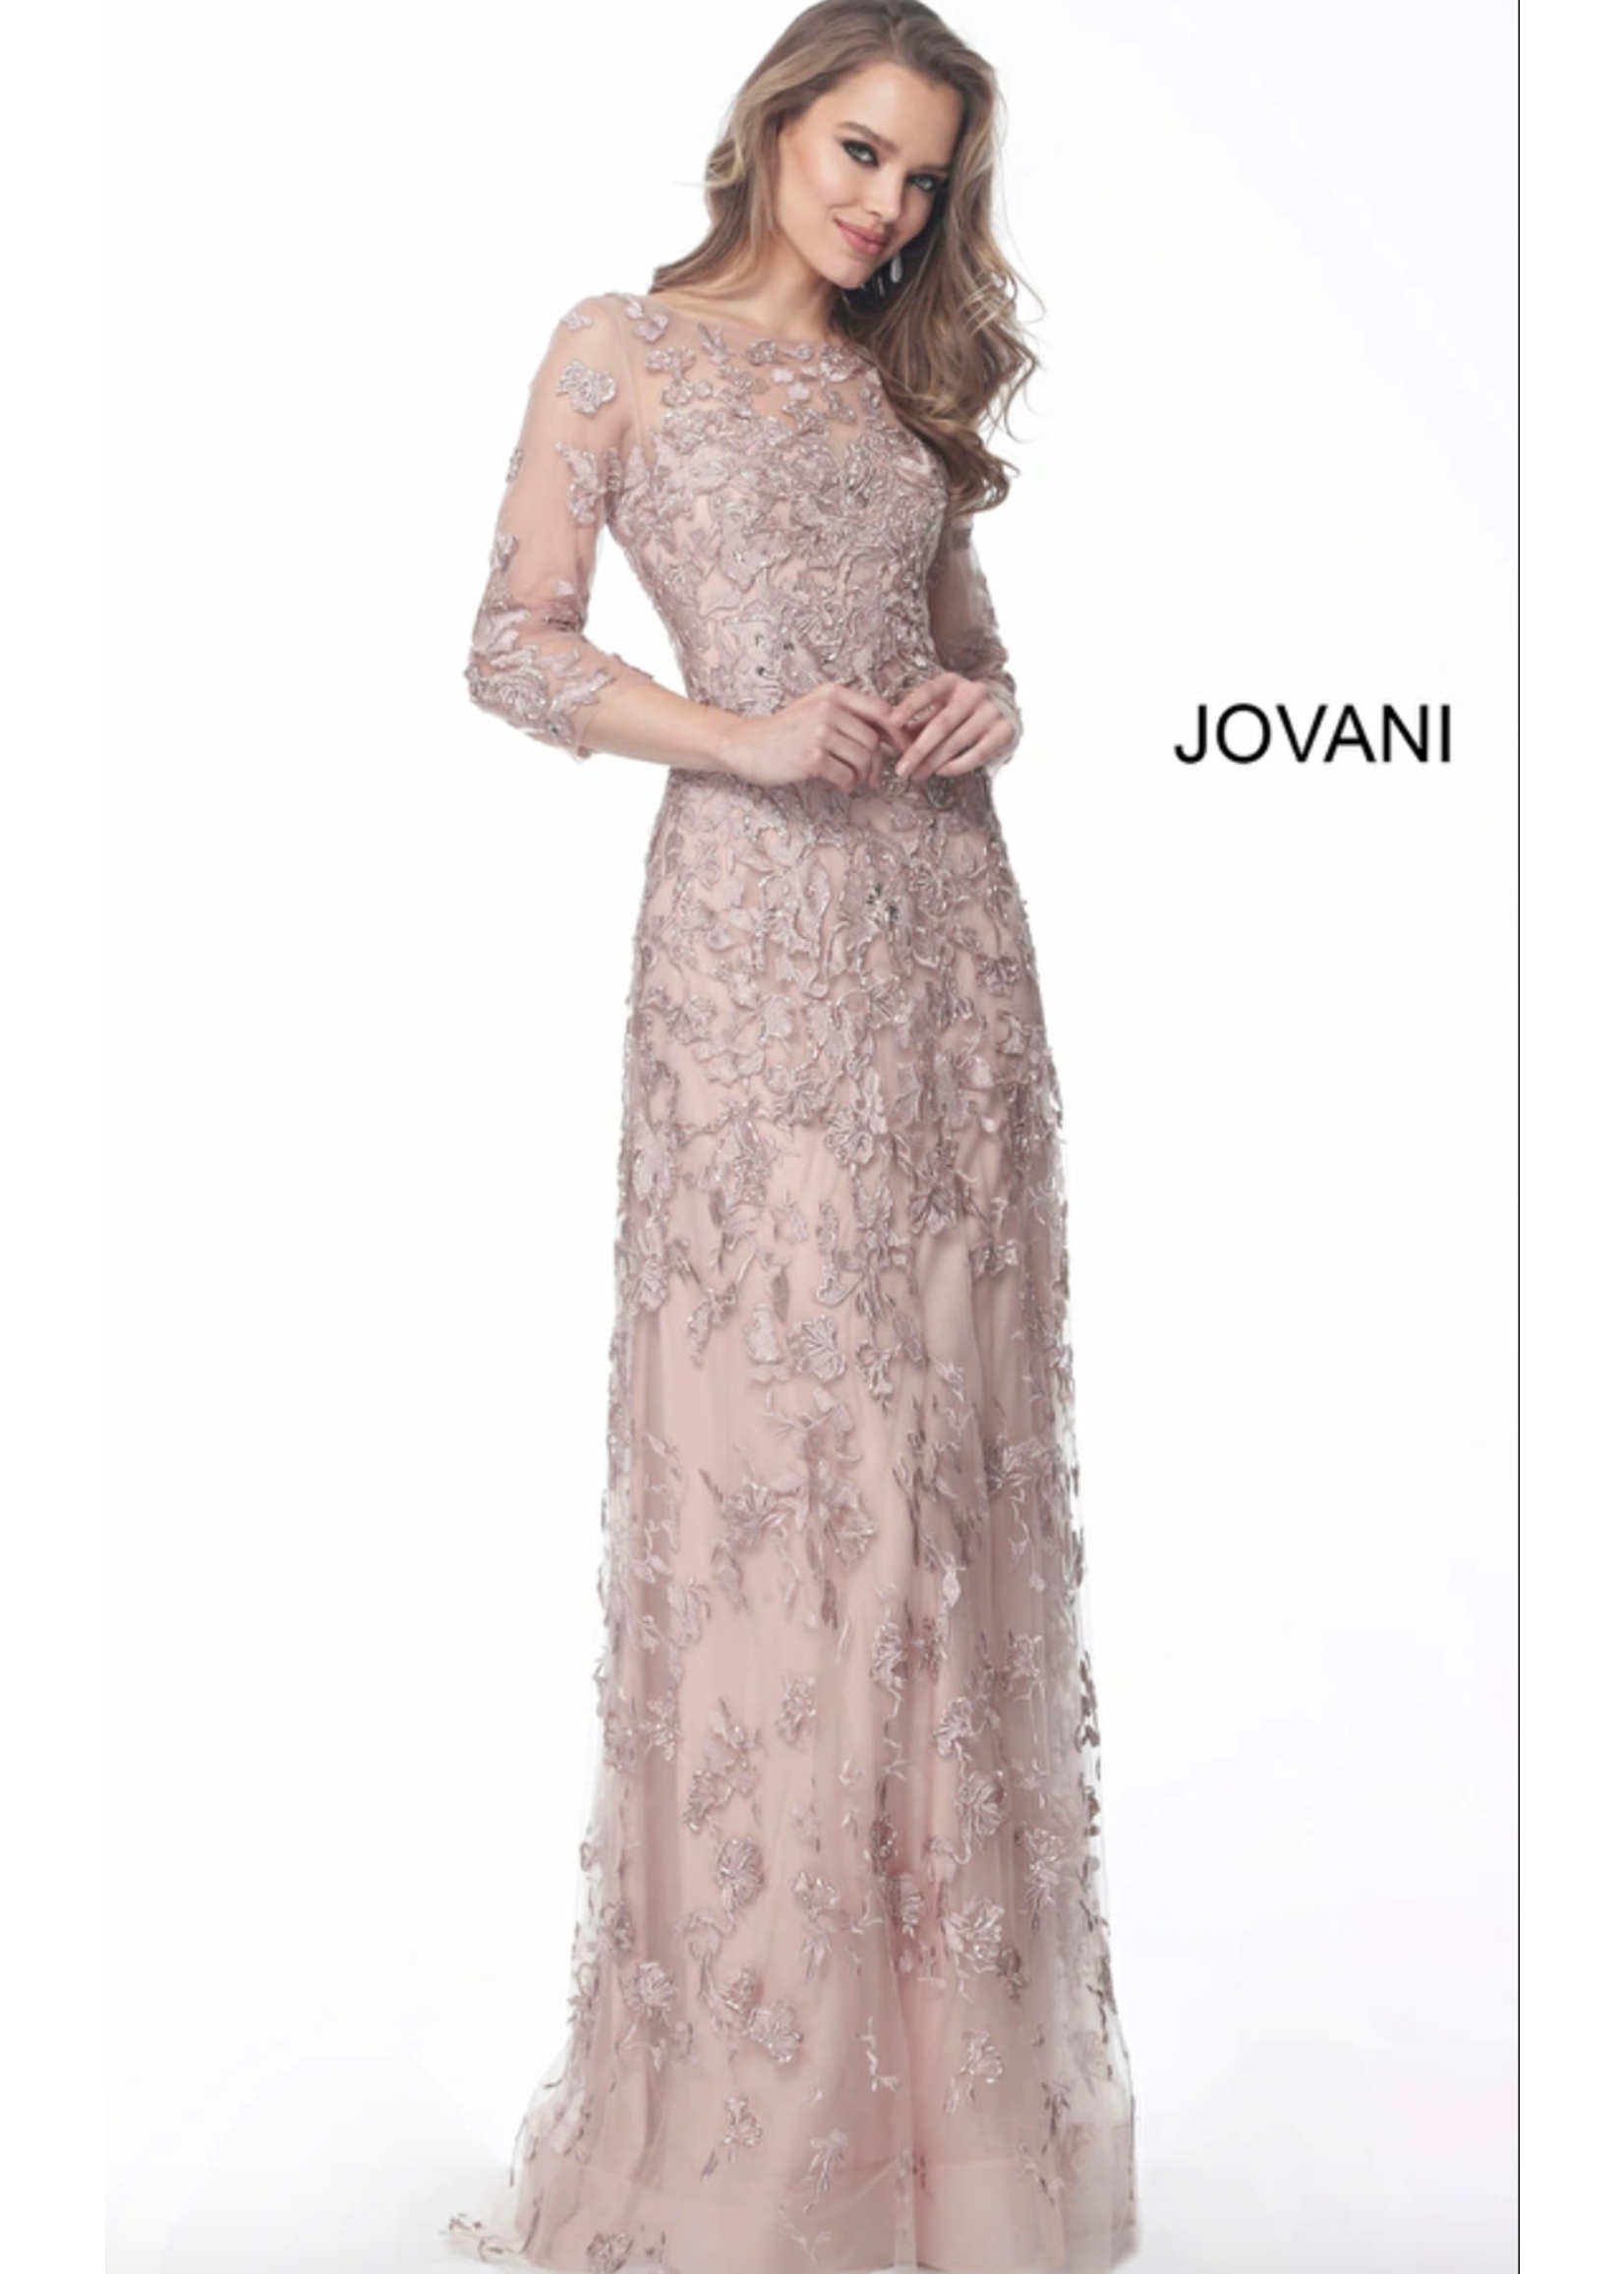 Jovani 59376A Embellished 3/4 Sleeve Gown